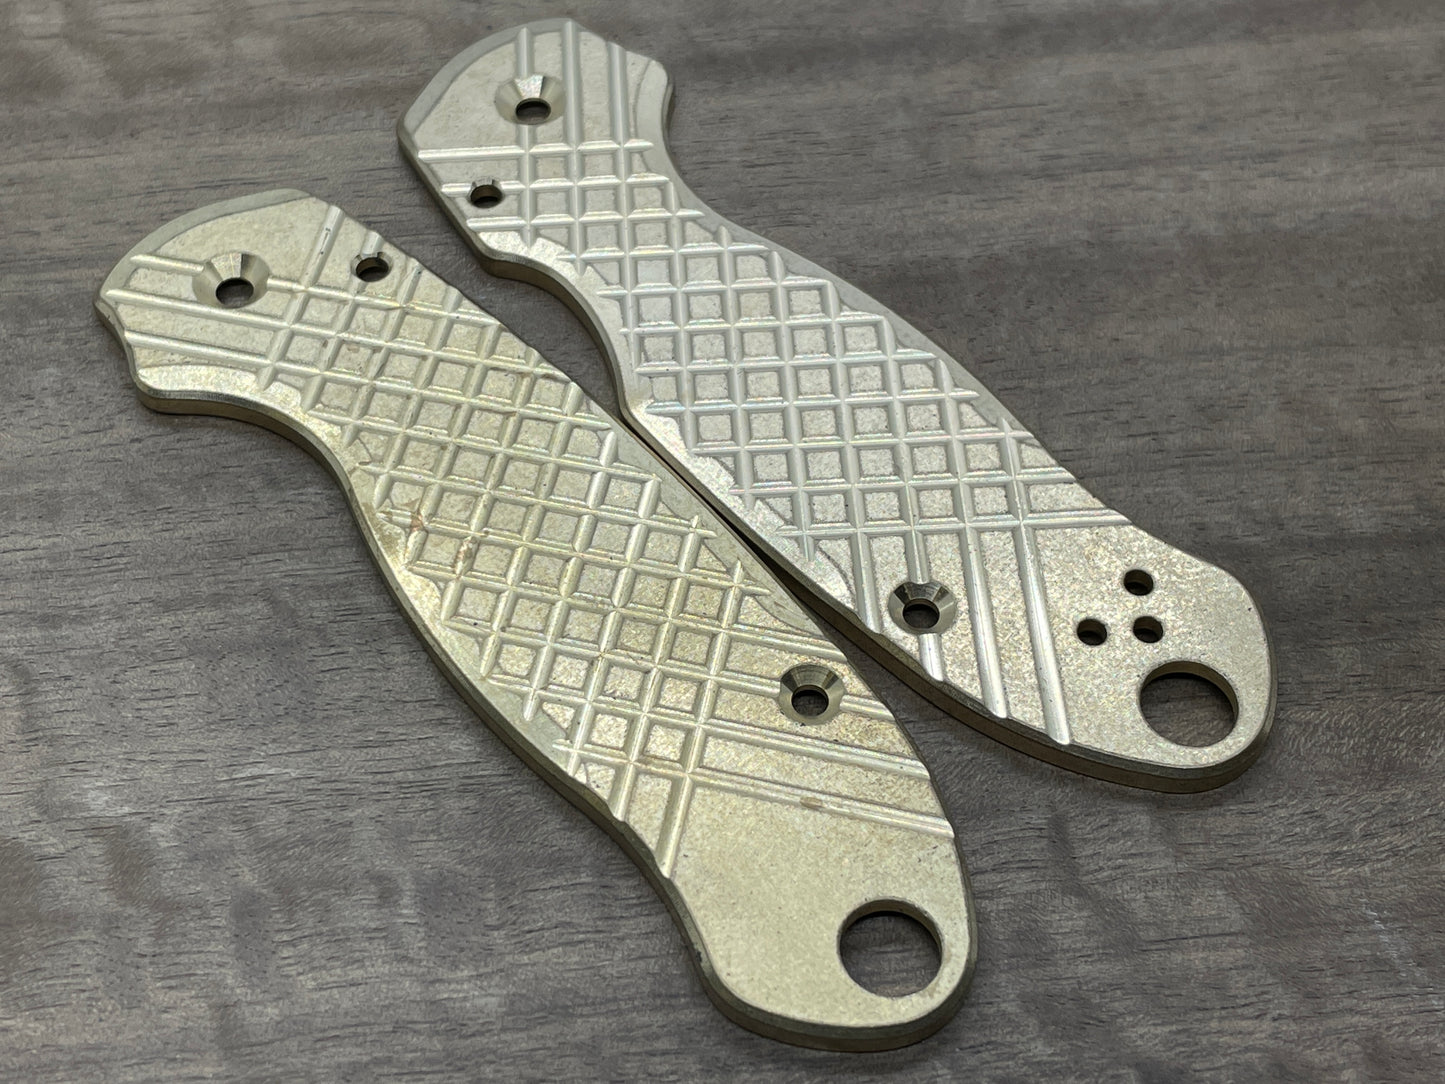 FRAG Cnc milled TUMBLED Brass Scales for Spyderco Para 3